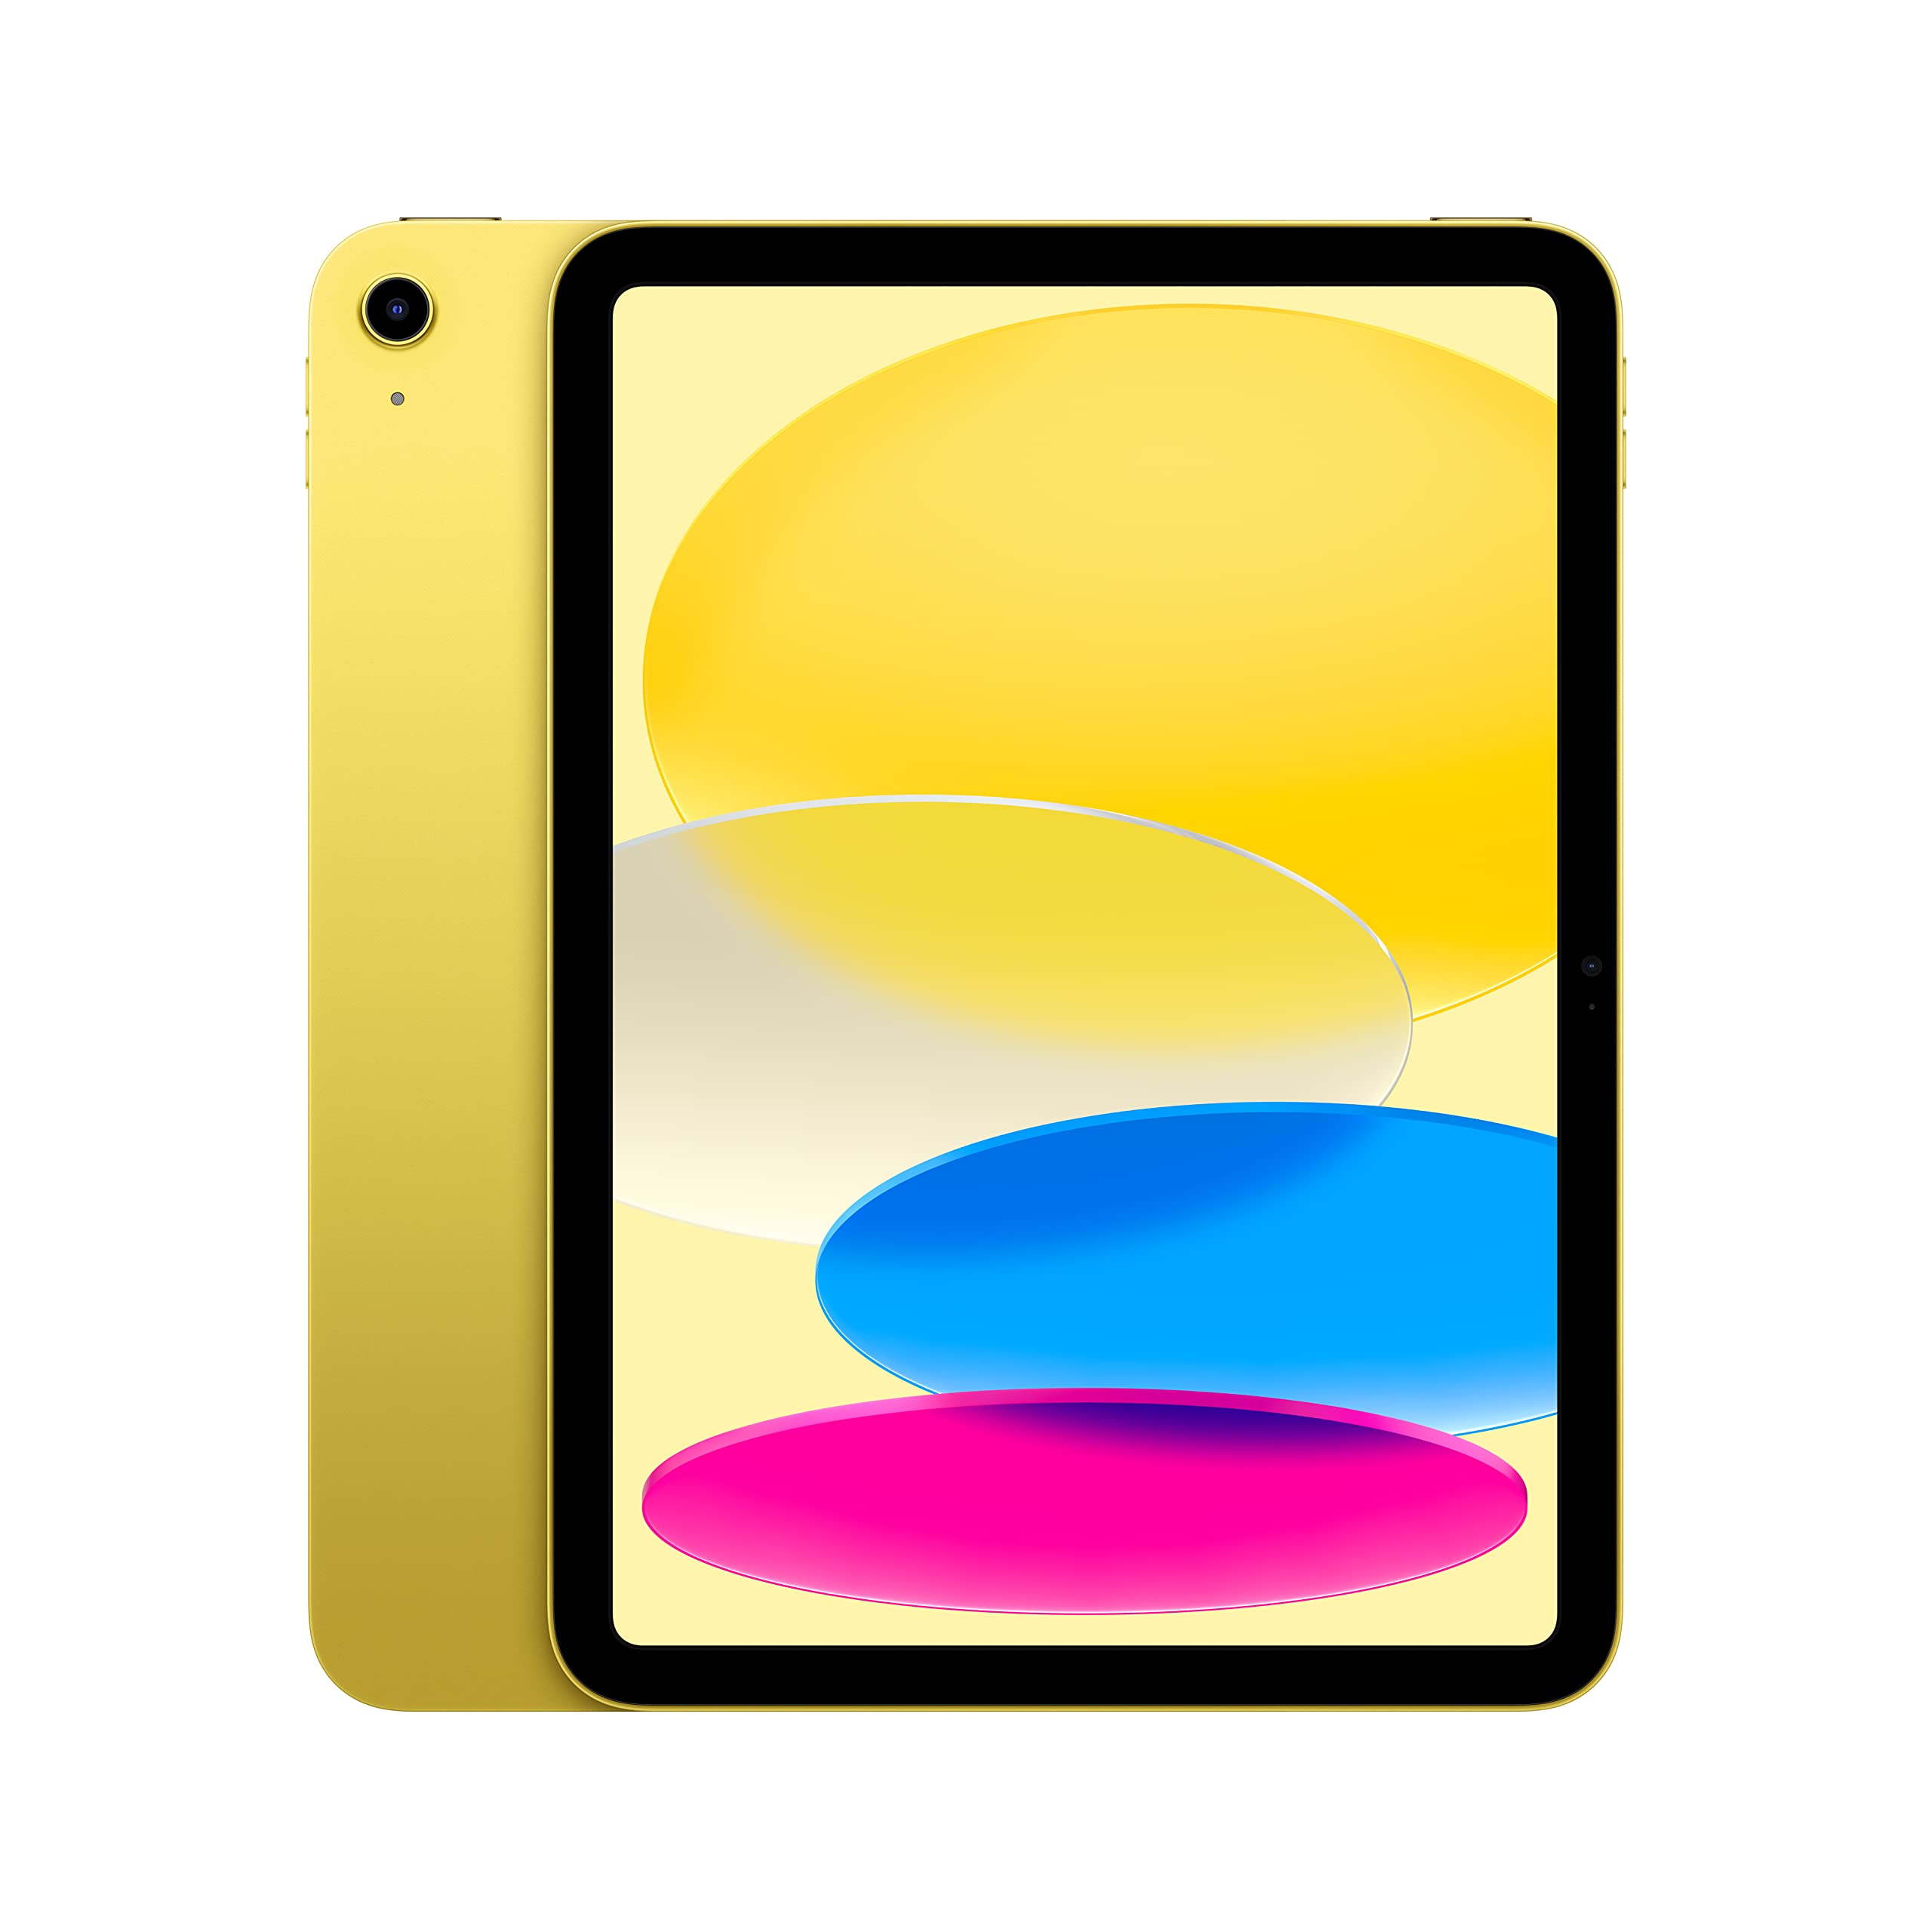 Apple iPad (10th Generation): with A14 Bionic chip, 10.9-inch Liquid Retina Display, 256GB, Wi-Fi 6, 12MP front/12MP Back Camera, Touch ID, All-Day Battery Life – Yellow